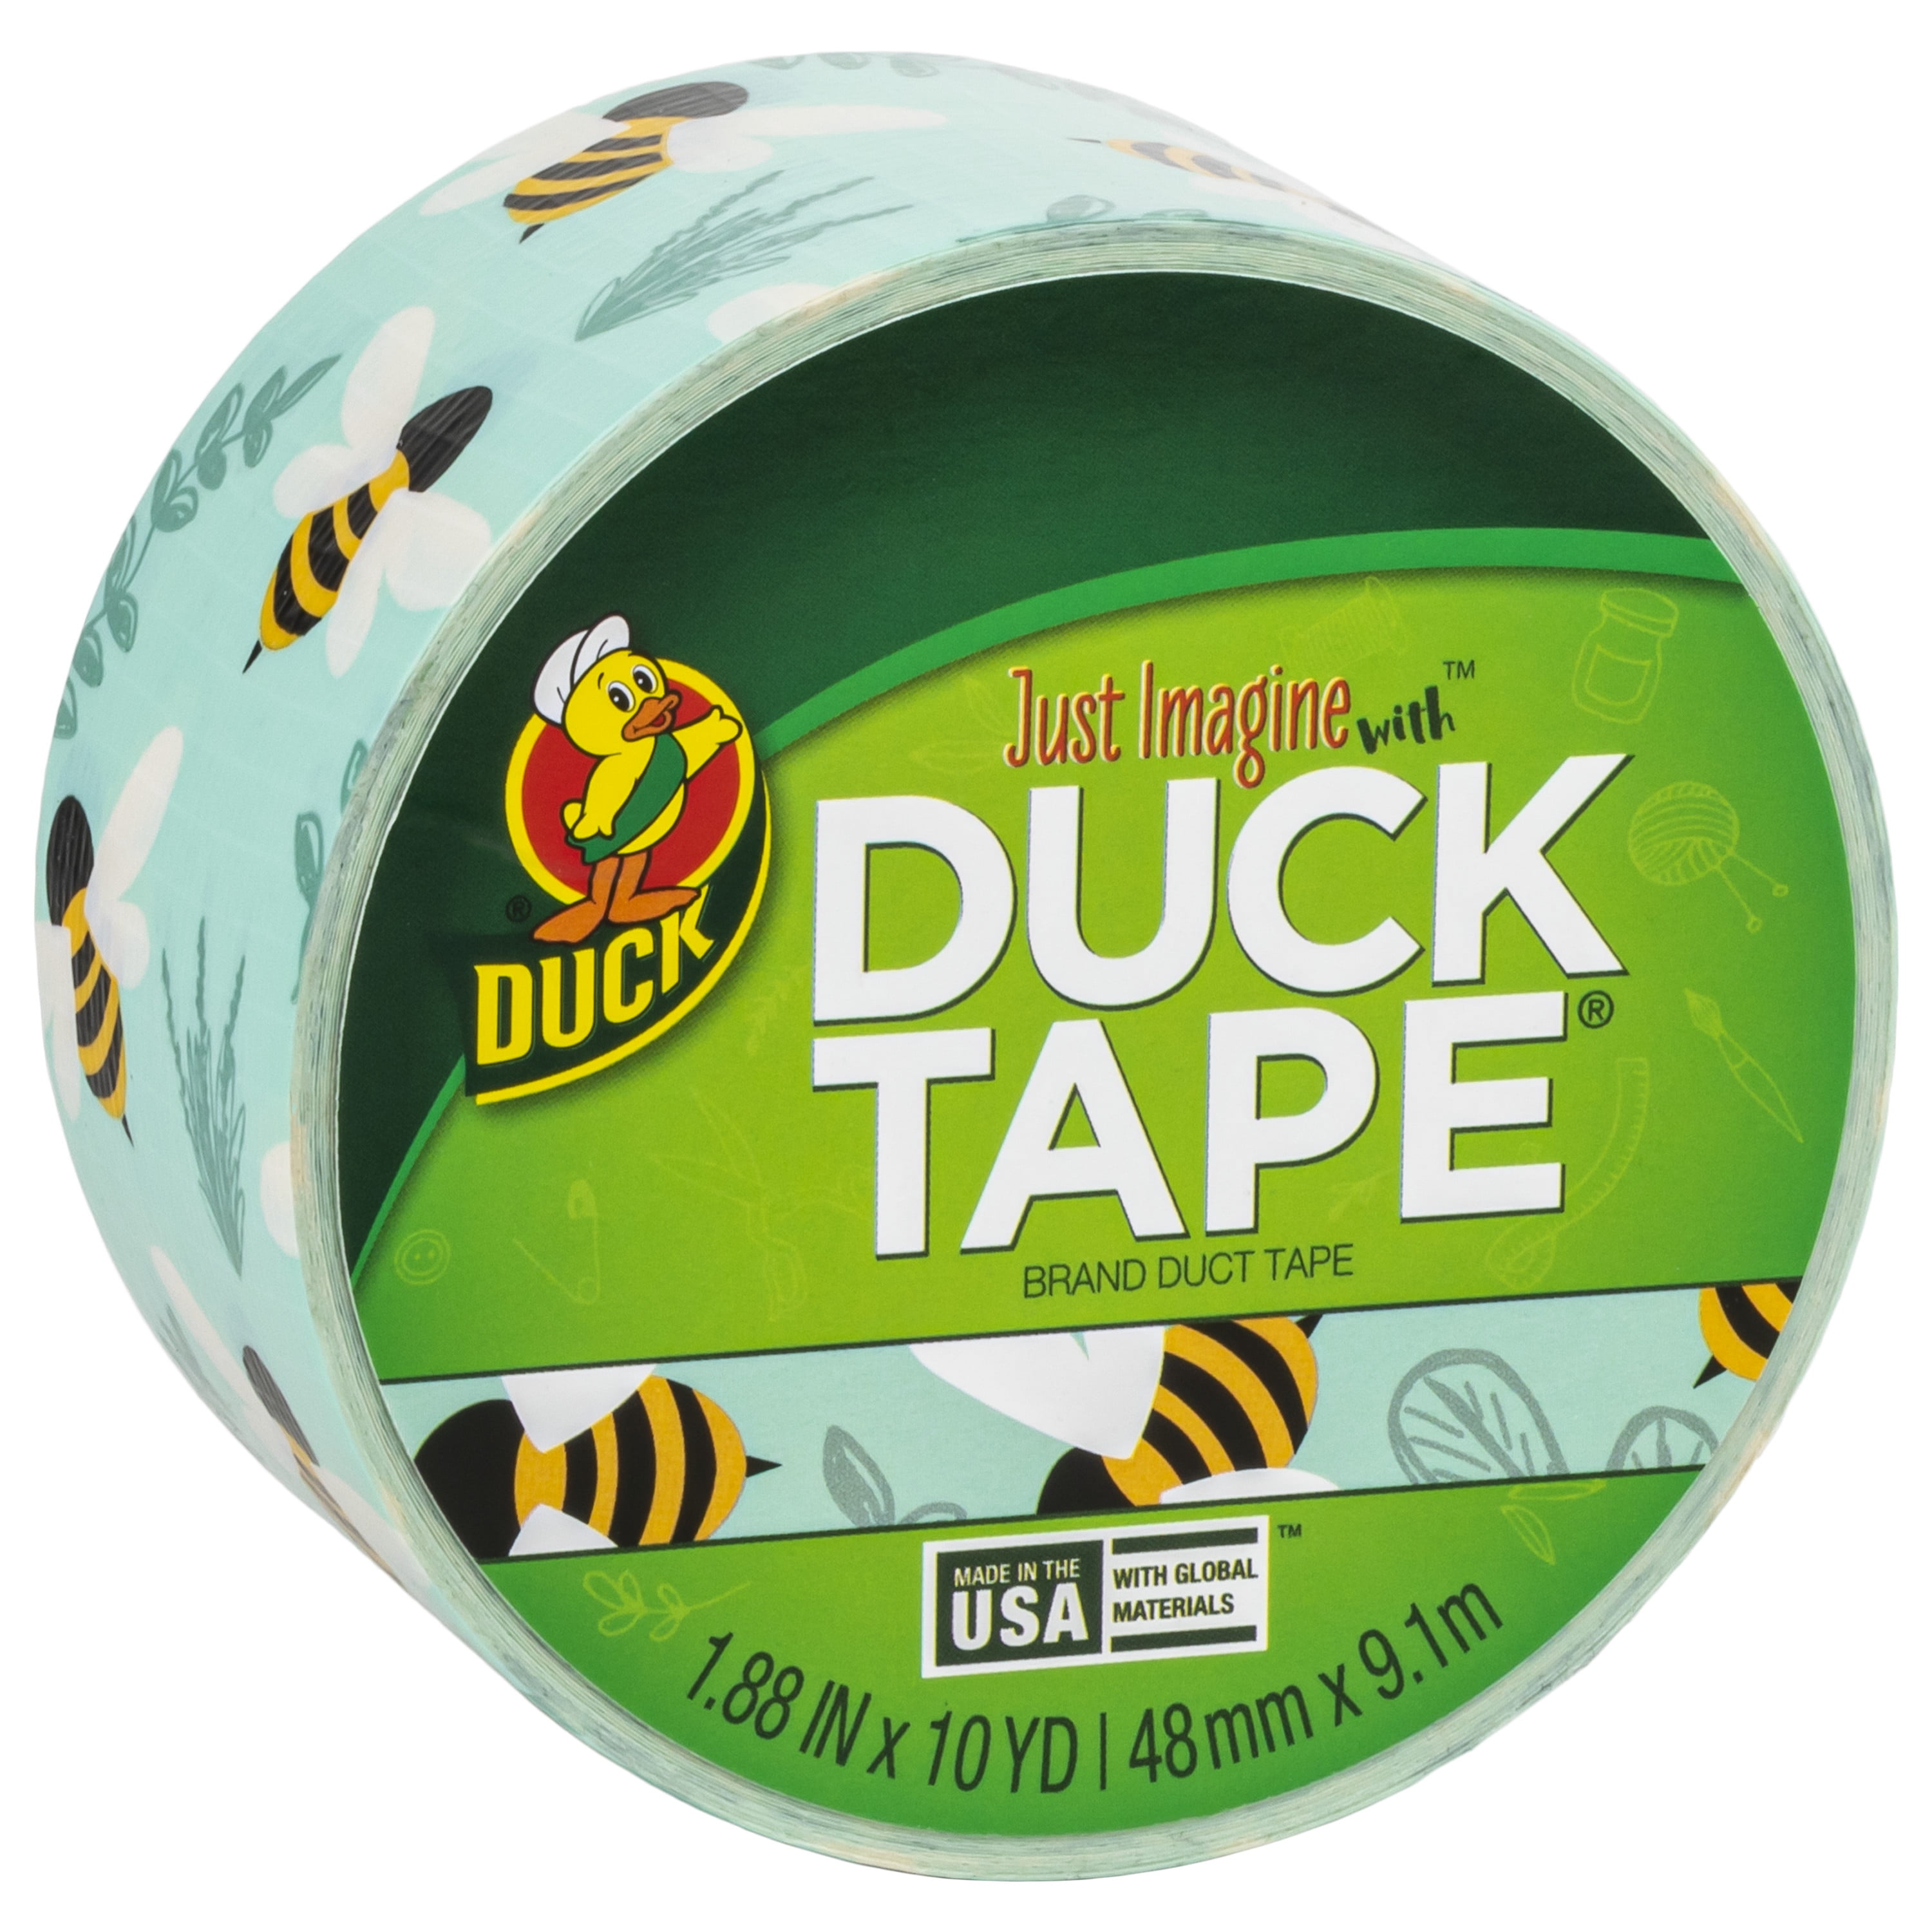 Duck Tape Patterned Duct Tape reviews in Household Essentials